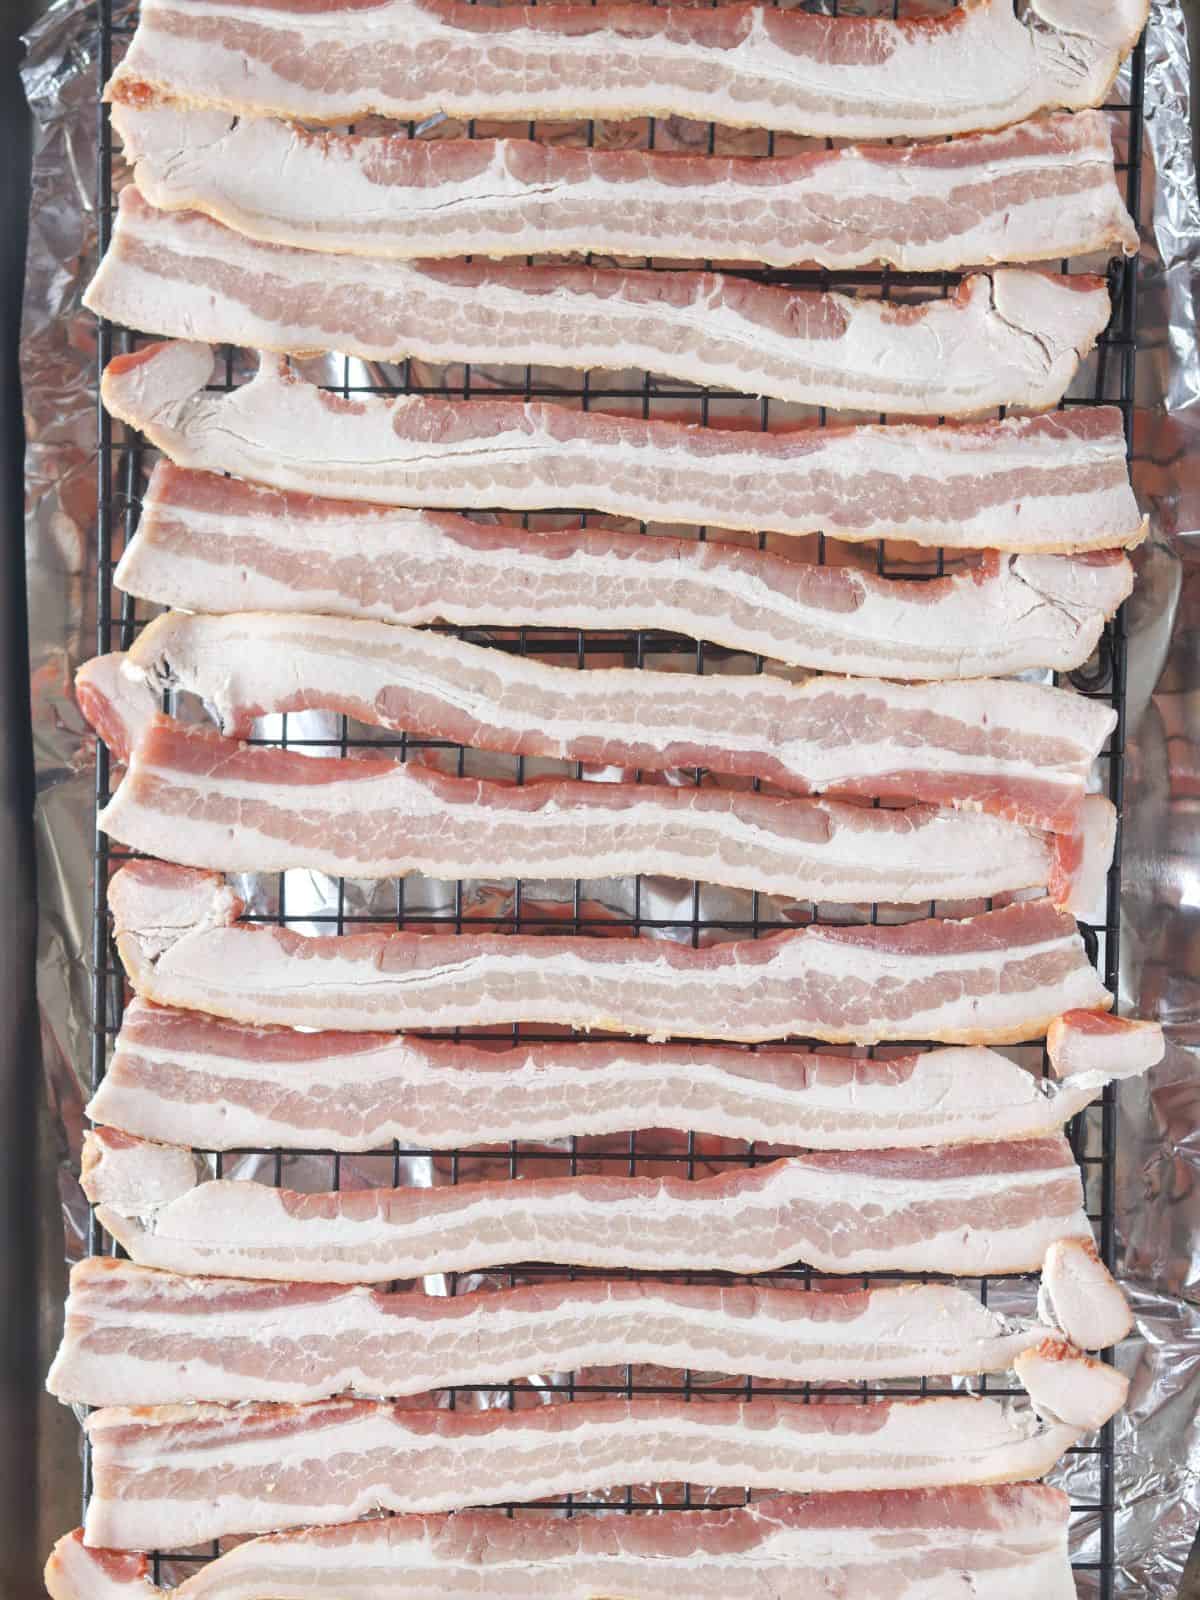 uncooked bacon on a cooling rack in a baking sheet.